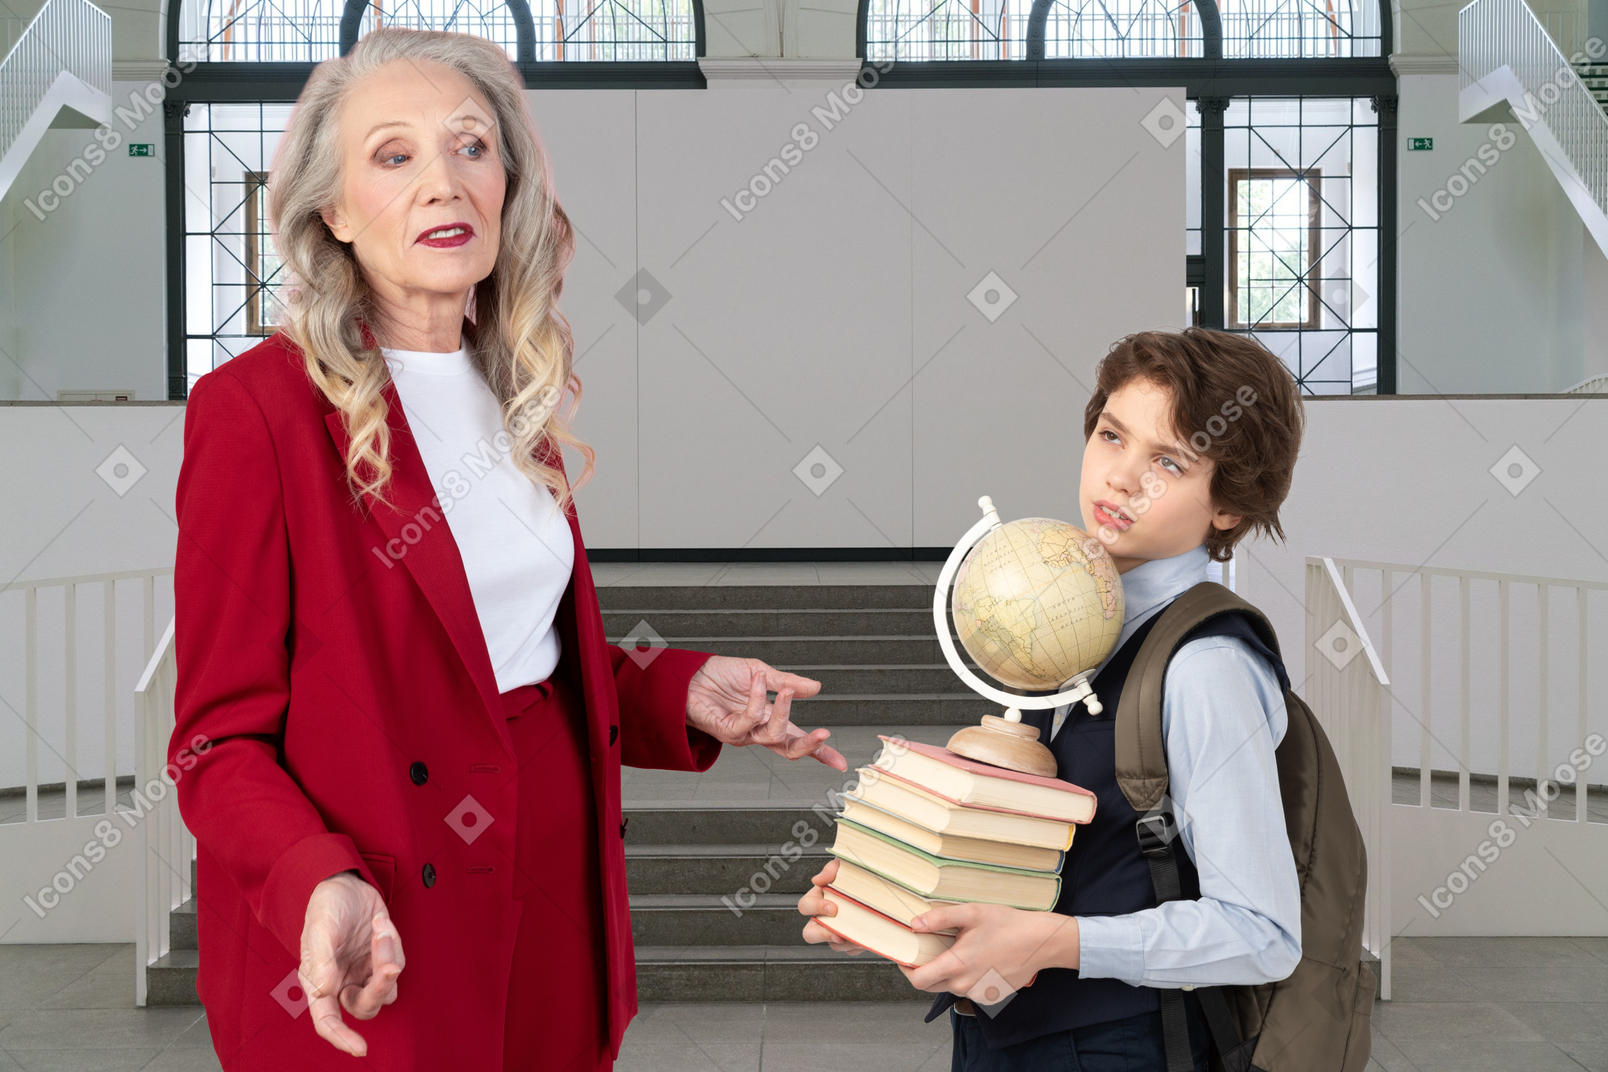 A schoolboy holding stack of books and a globe standing next to an older woman at school